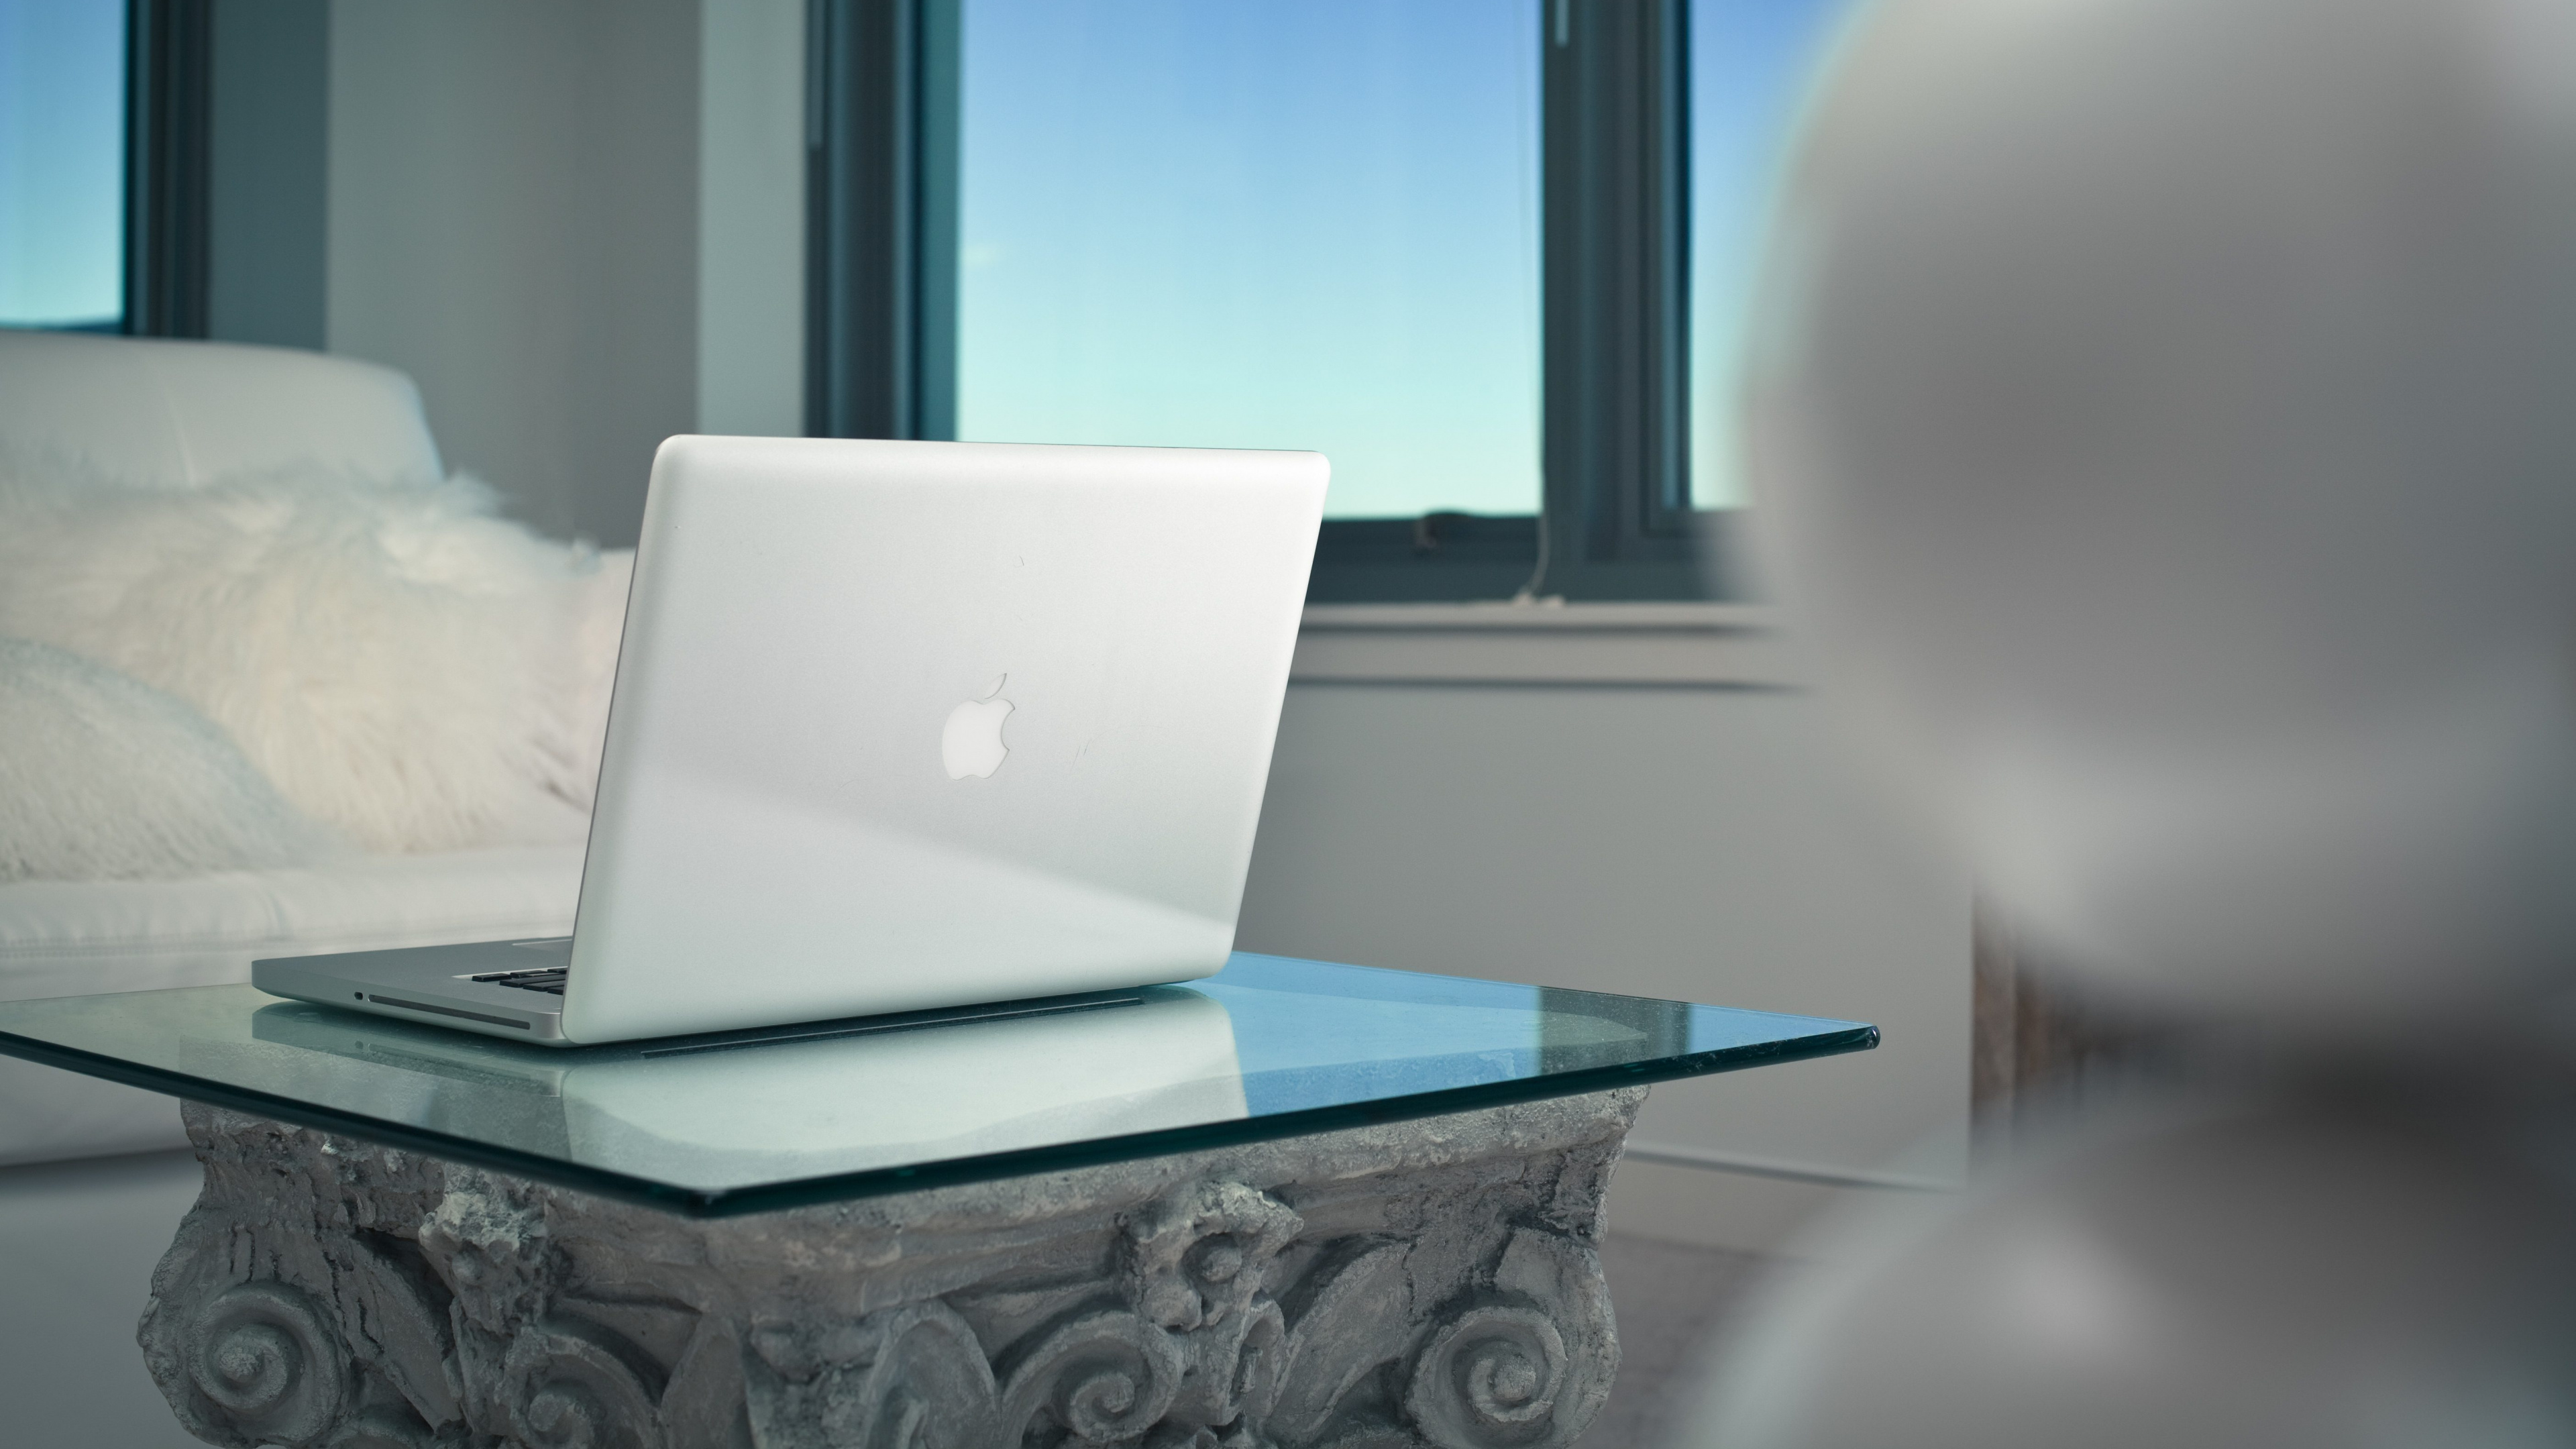 Silver Macbook on Green Table. Wallpaper in 3840x2160 Resolution